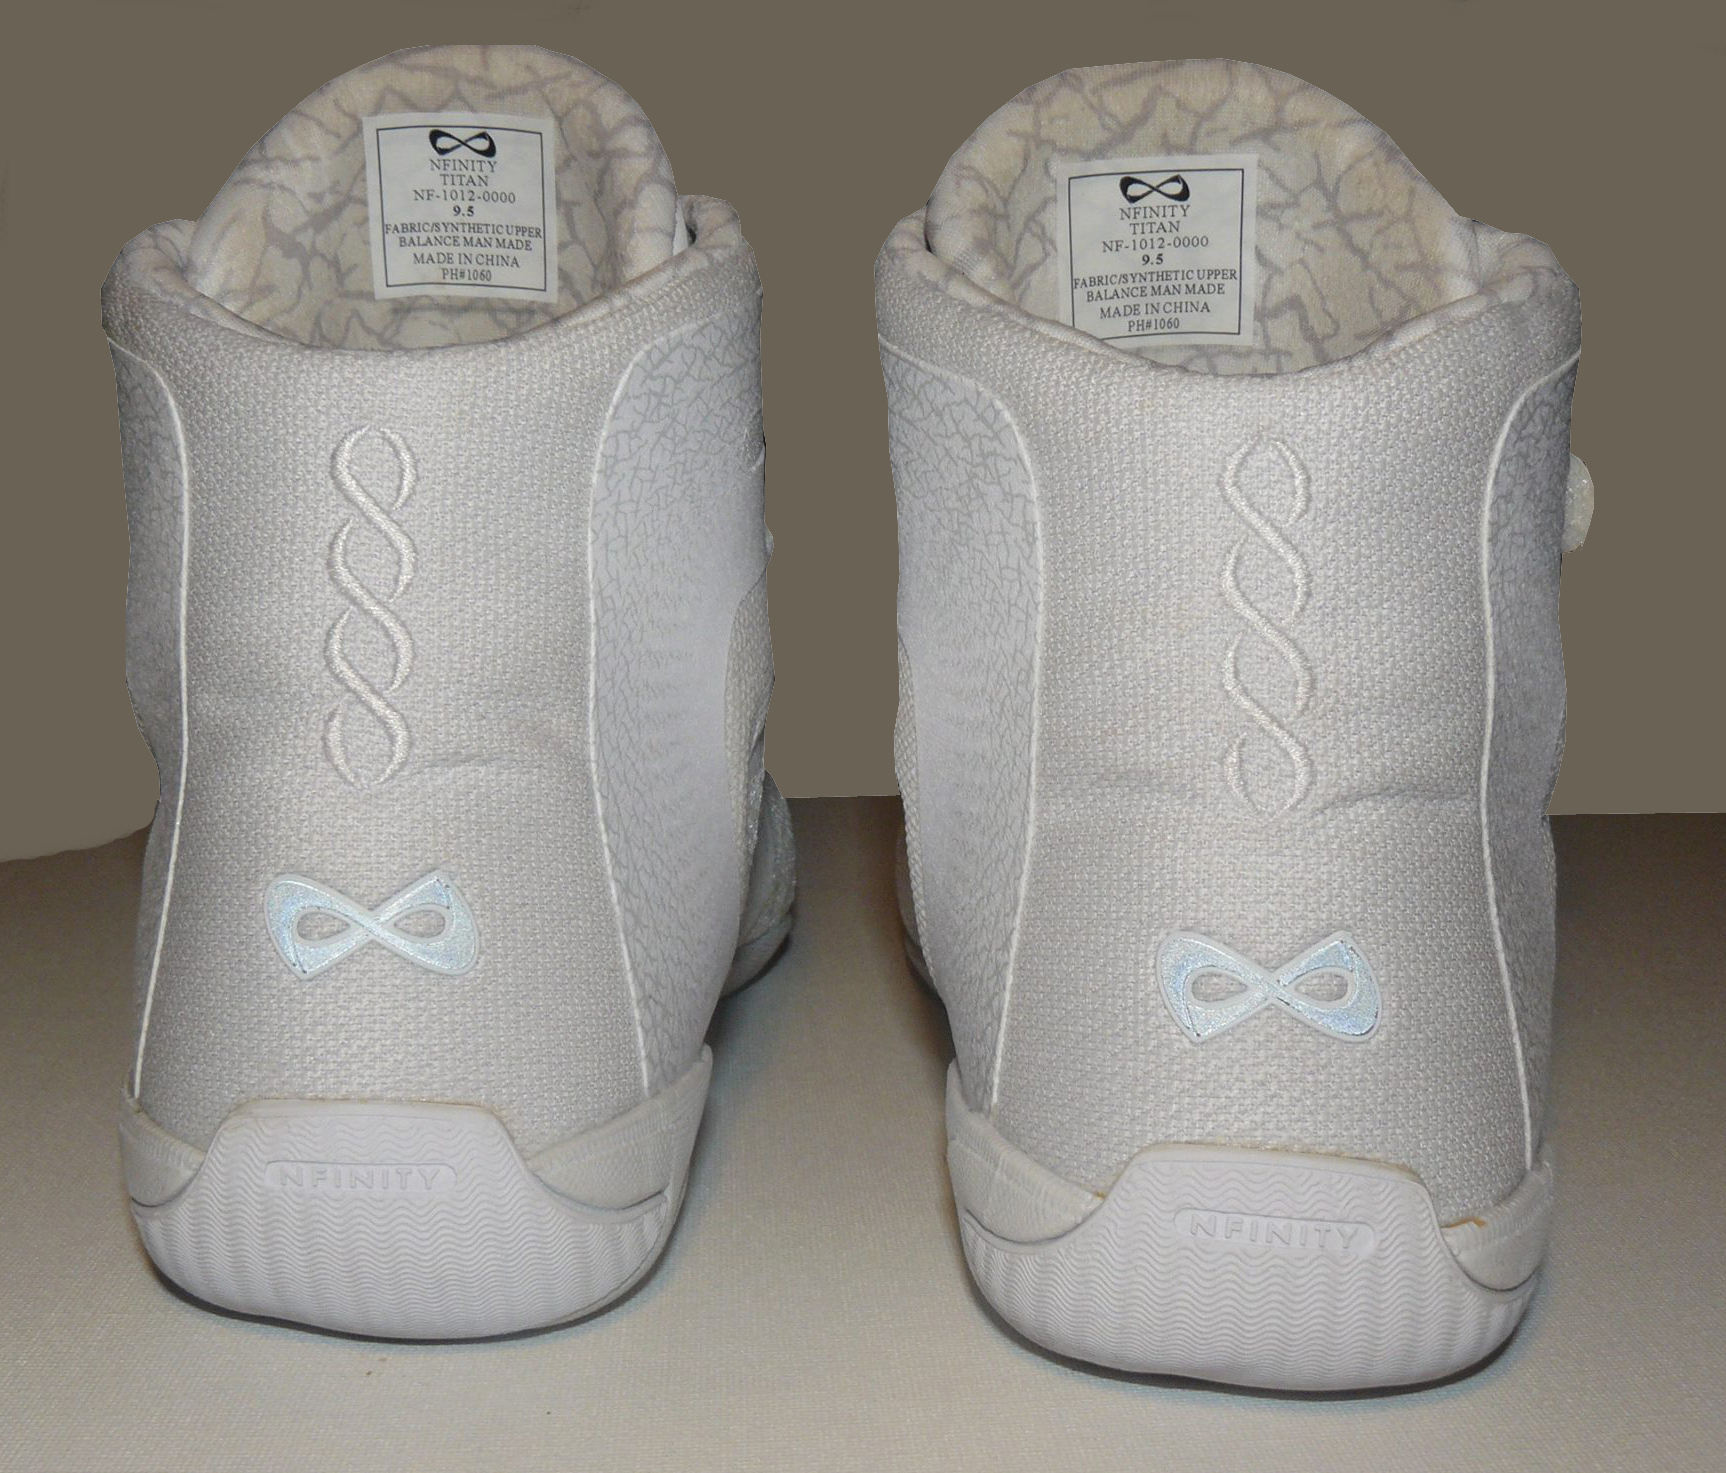 excel cheer shoes